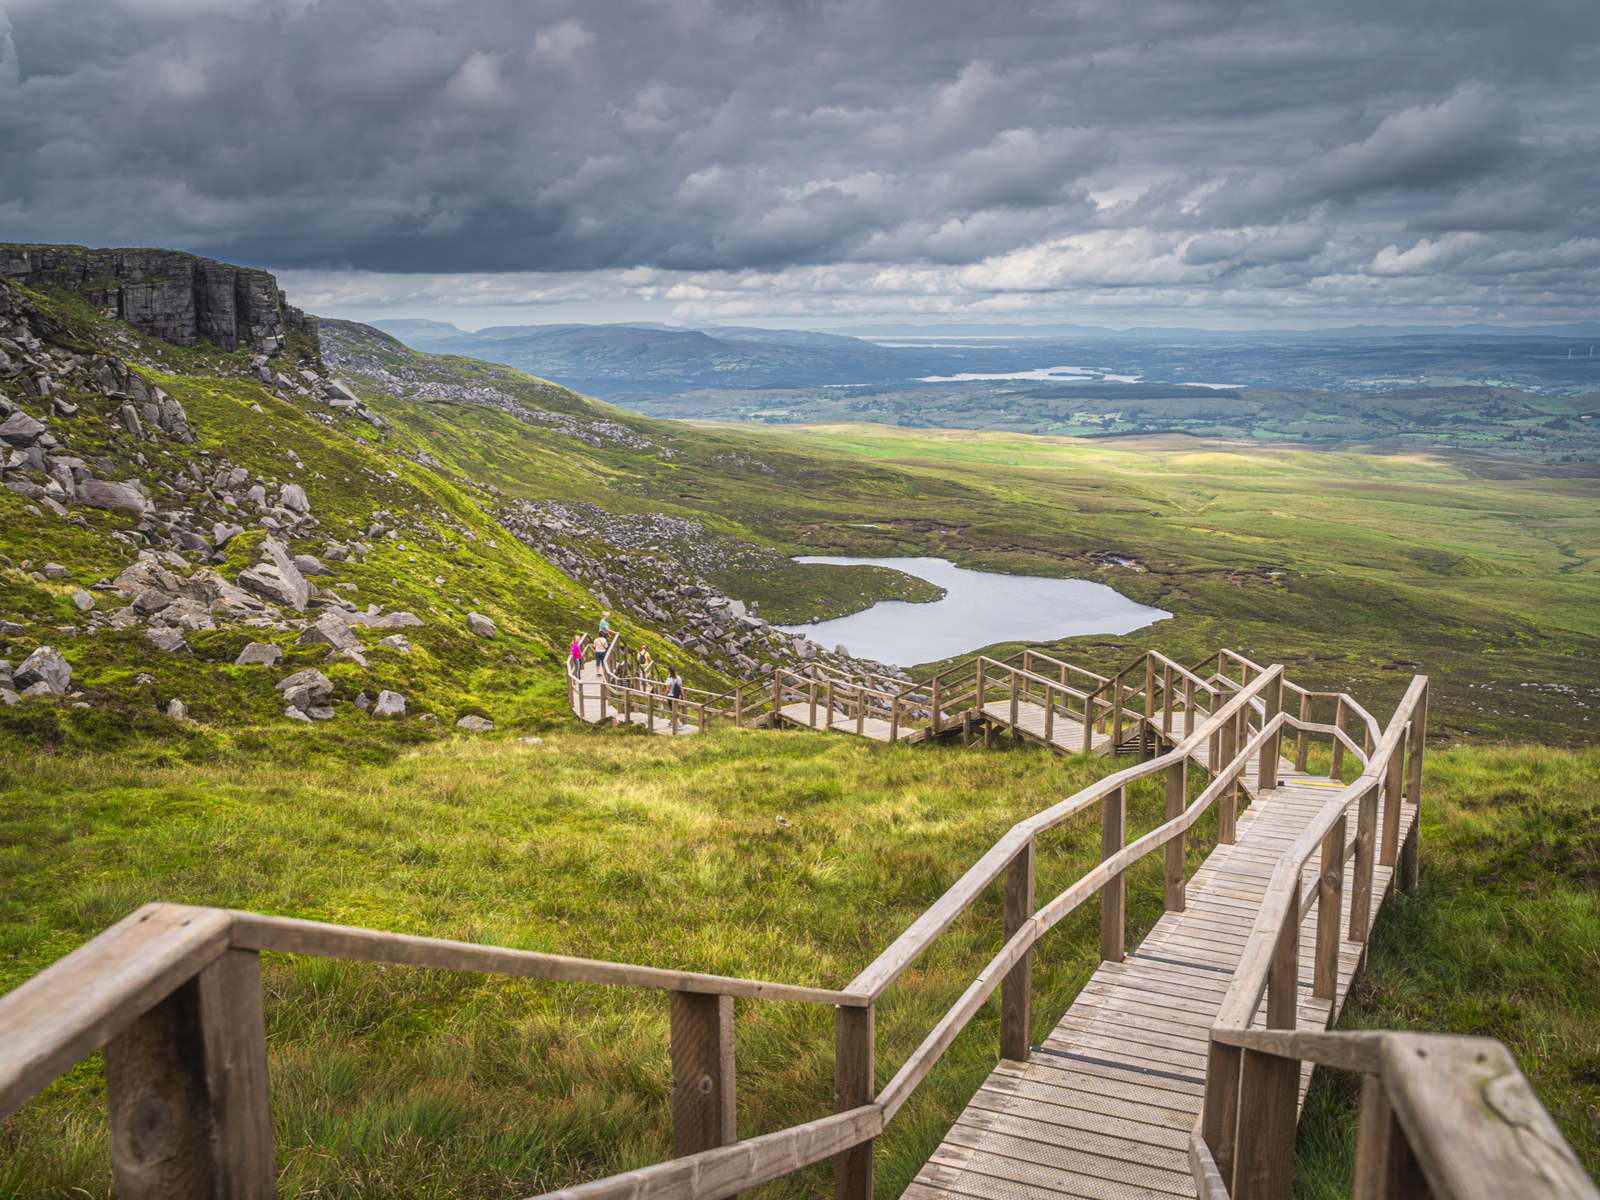 Visitors climbing down a long sloppy boardwalk at Cuilcagh Mountain Park, one of the best places to visit in Ireland, on an overcast day